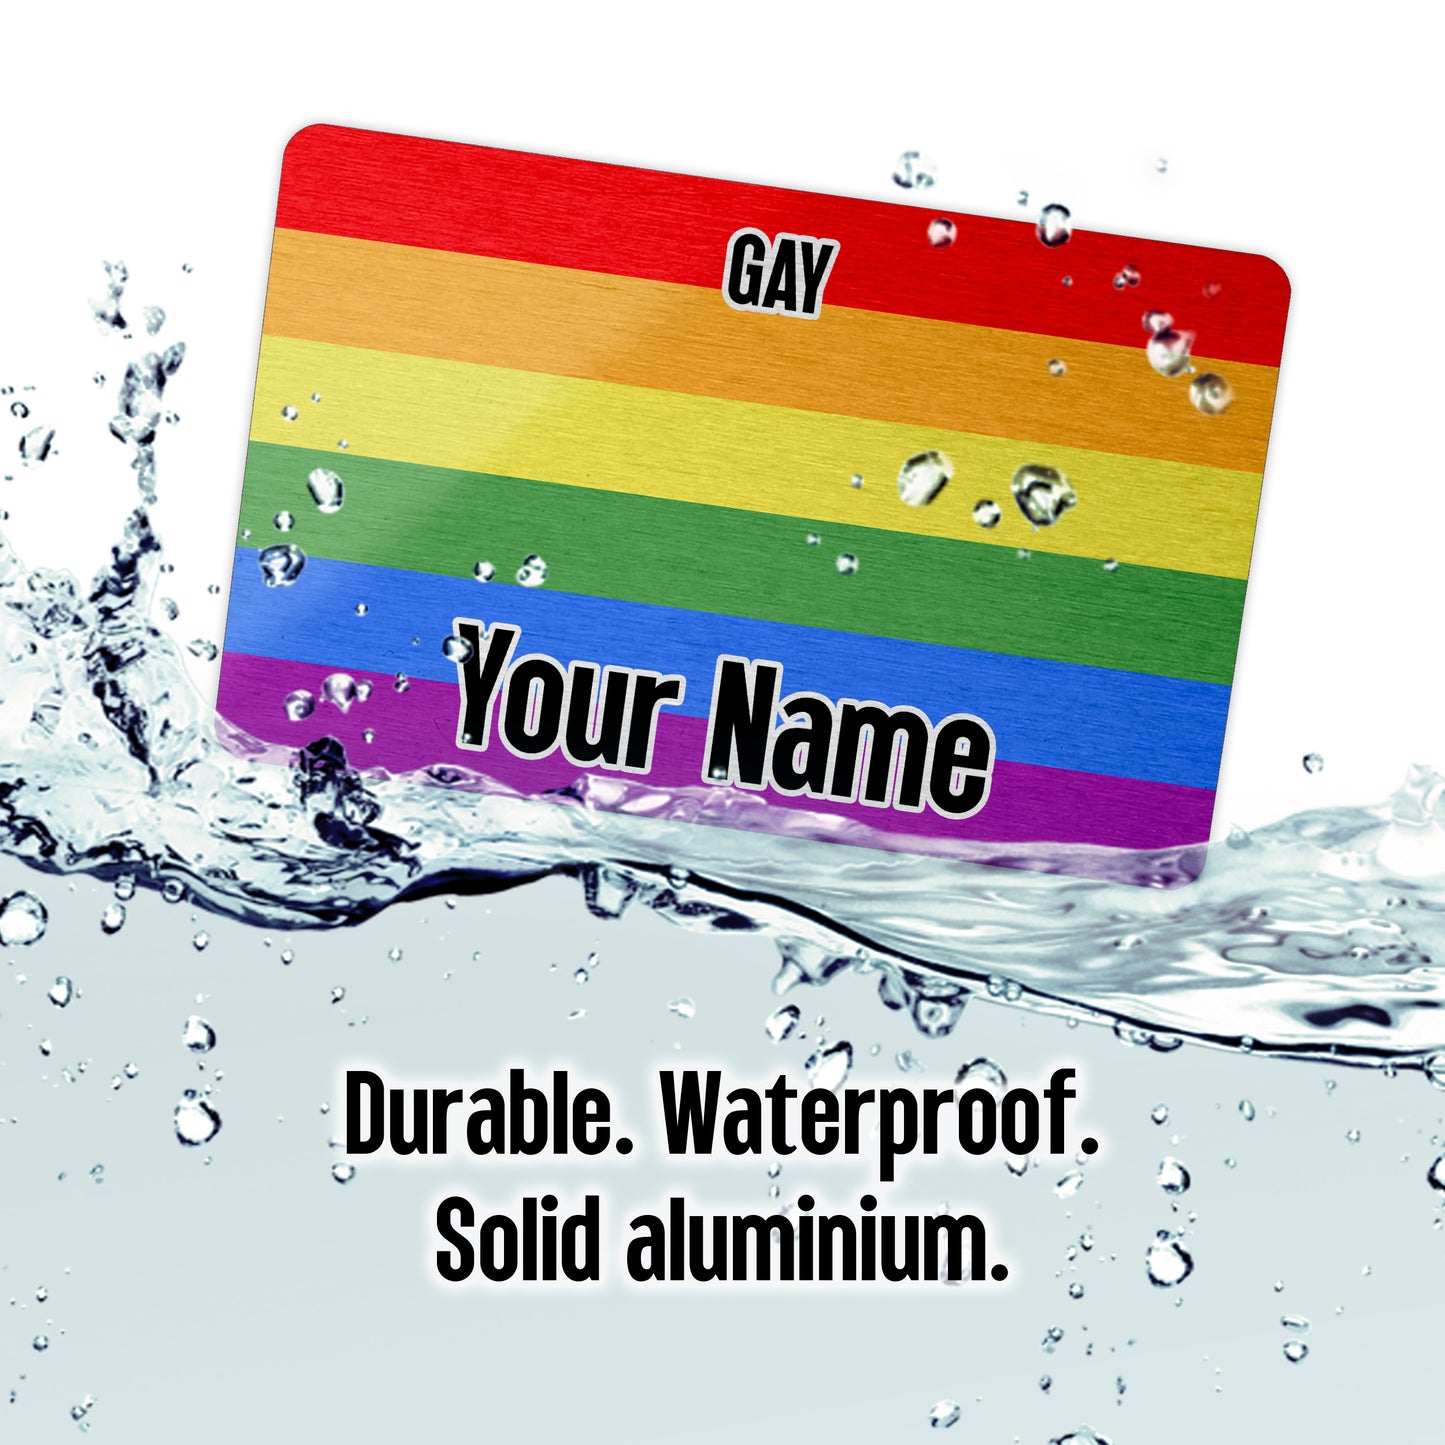 Aluminium metal wallet card personalised with your name and the classic rainbow gay pride flag